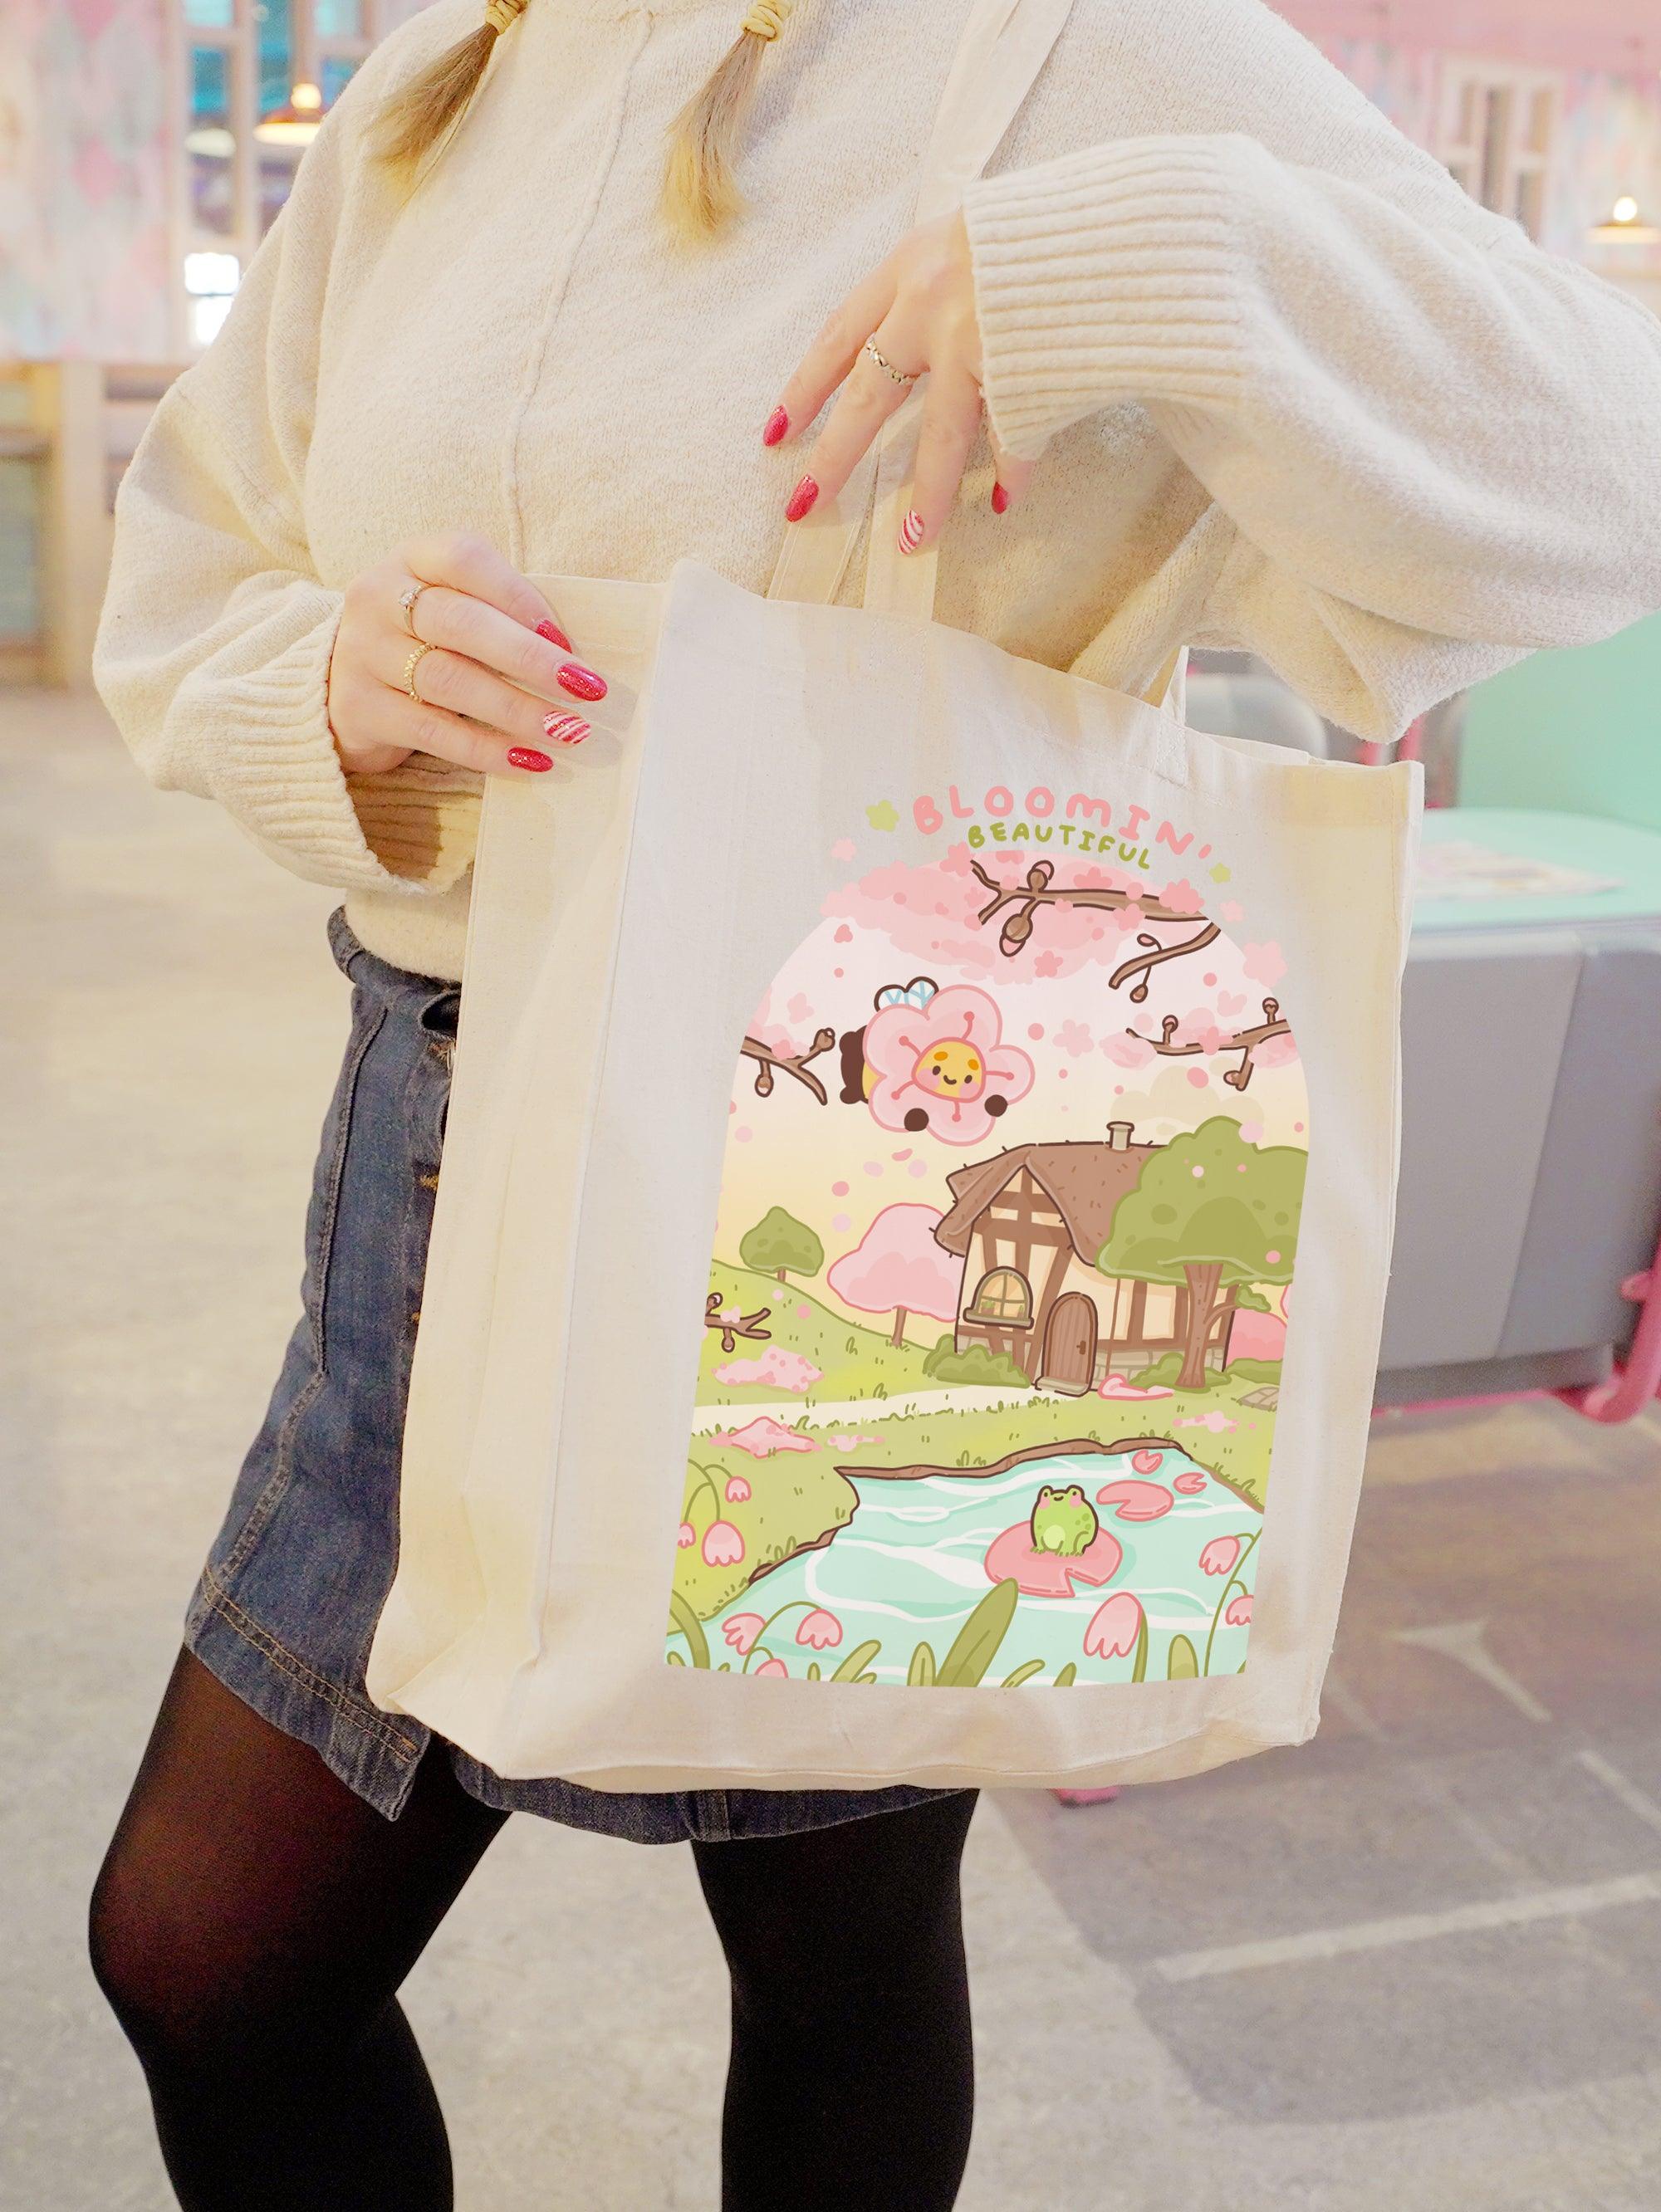 Pink Spring Scene Tote Bag featuring Bumblebutt, the adorable bumble bee character - Eco-friendly and practical.